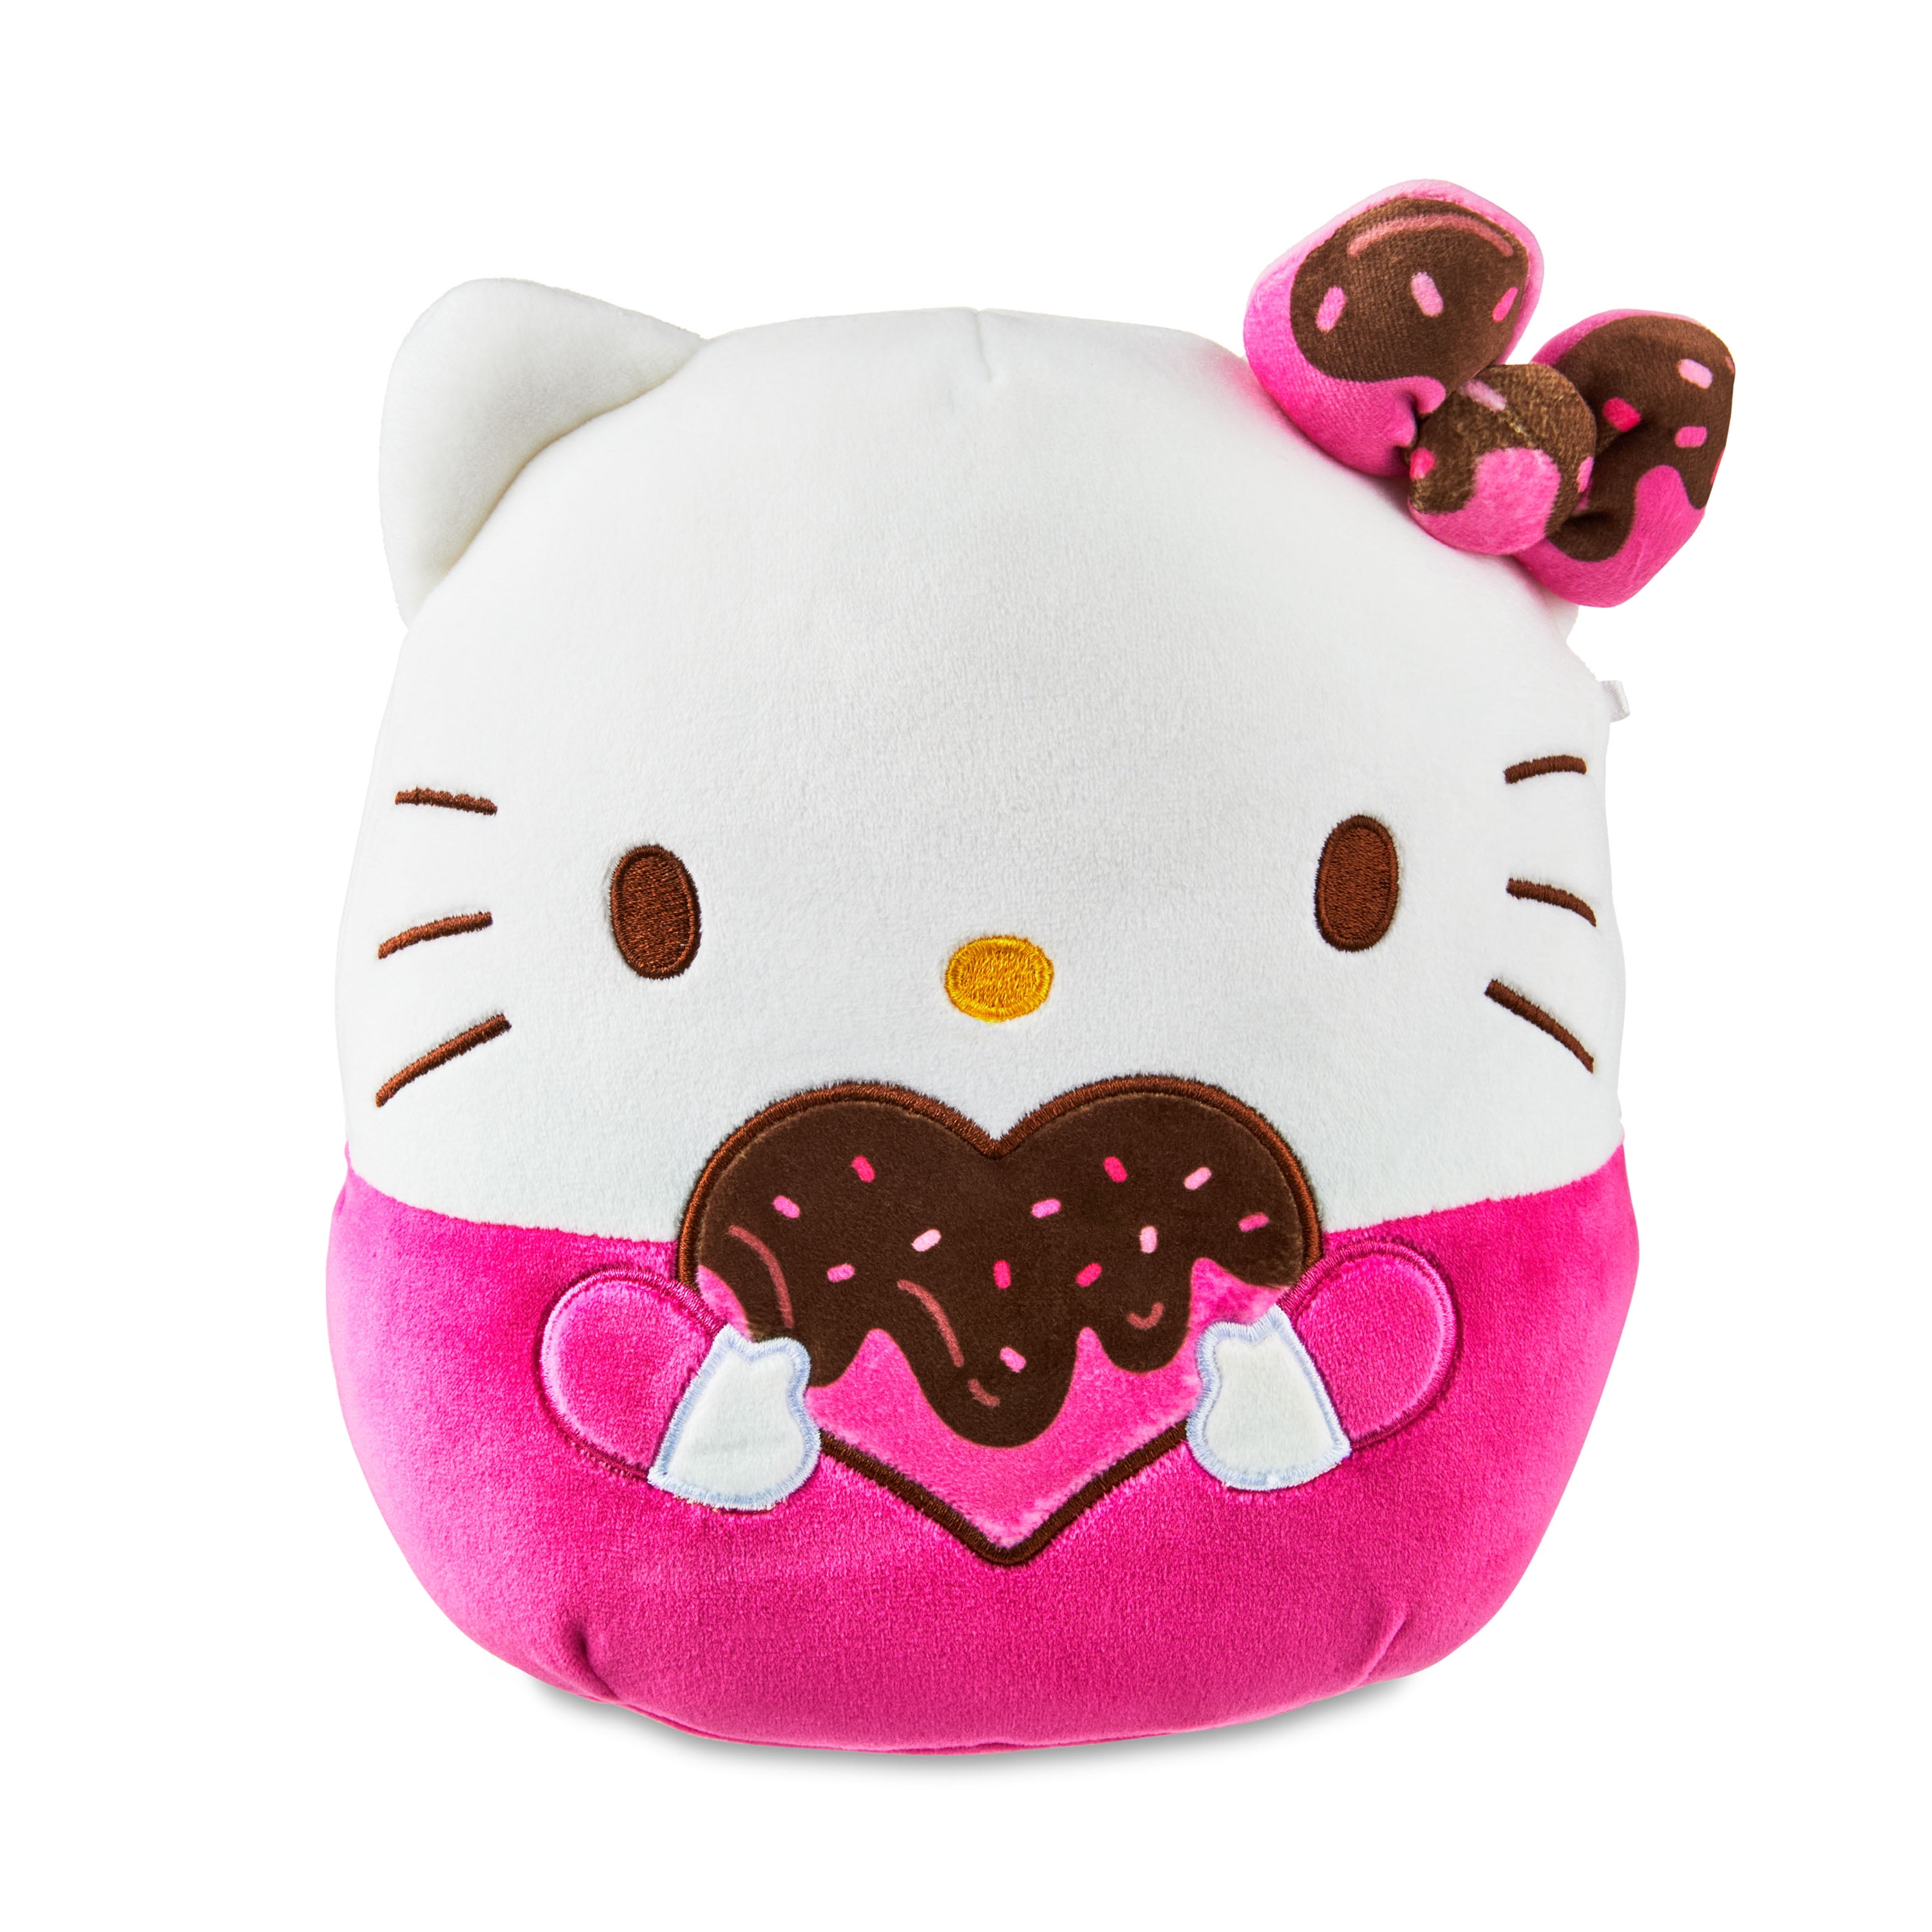 Squishmallows Official Plush 8 inch Pink Hello Kitty - Child's